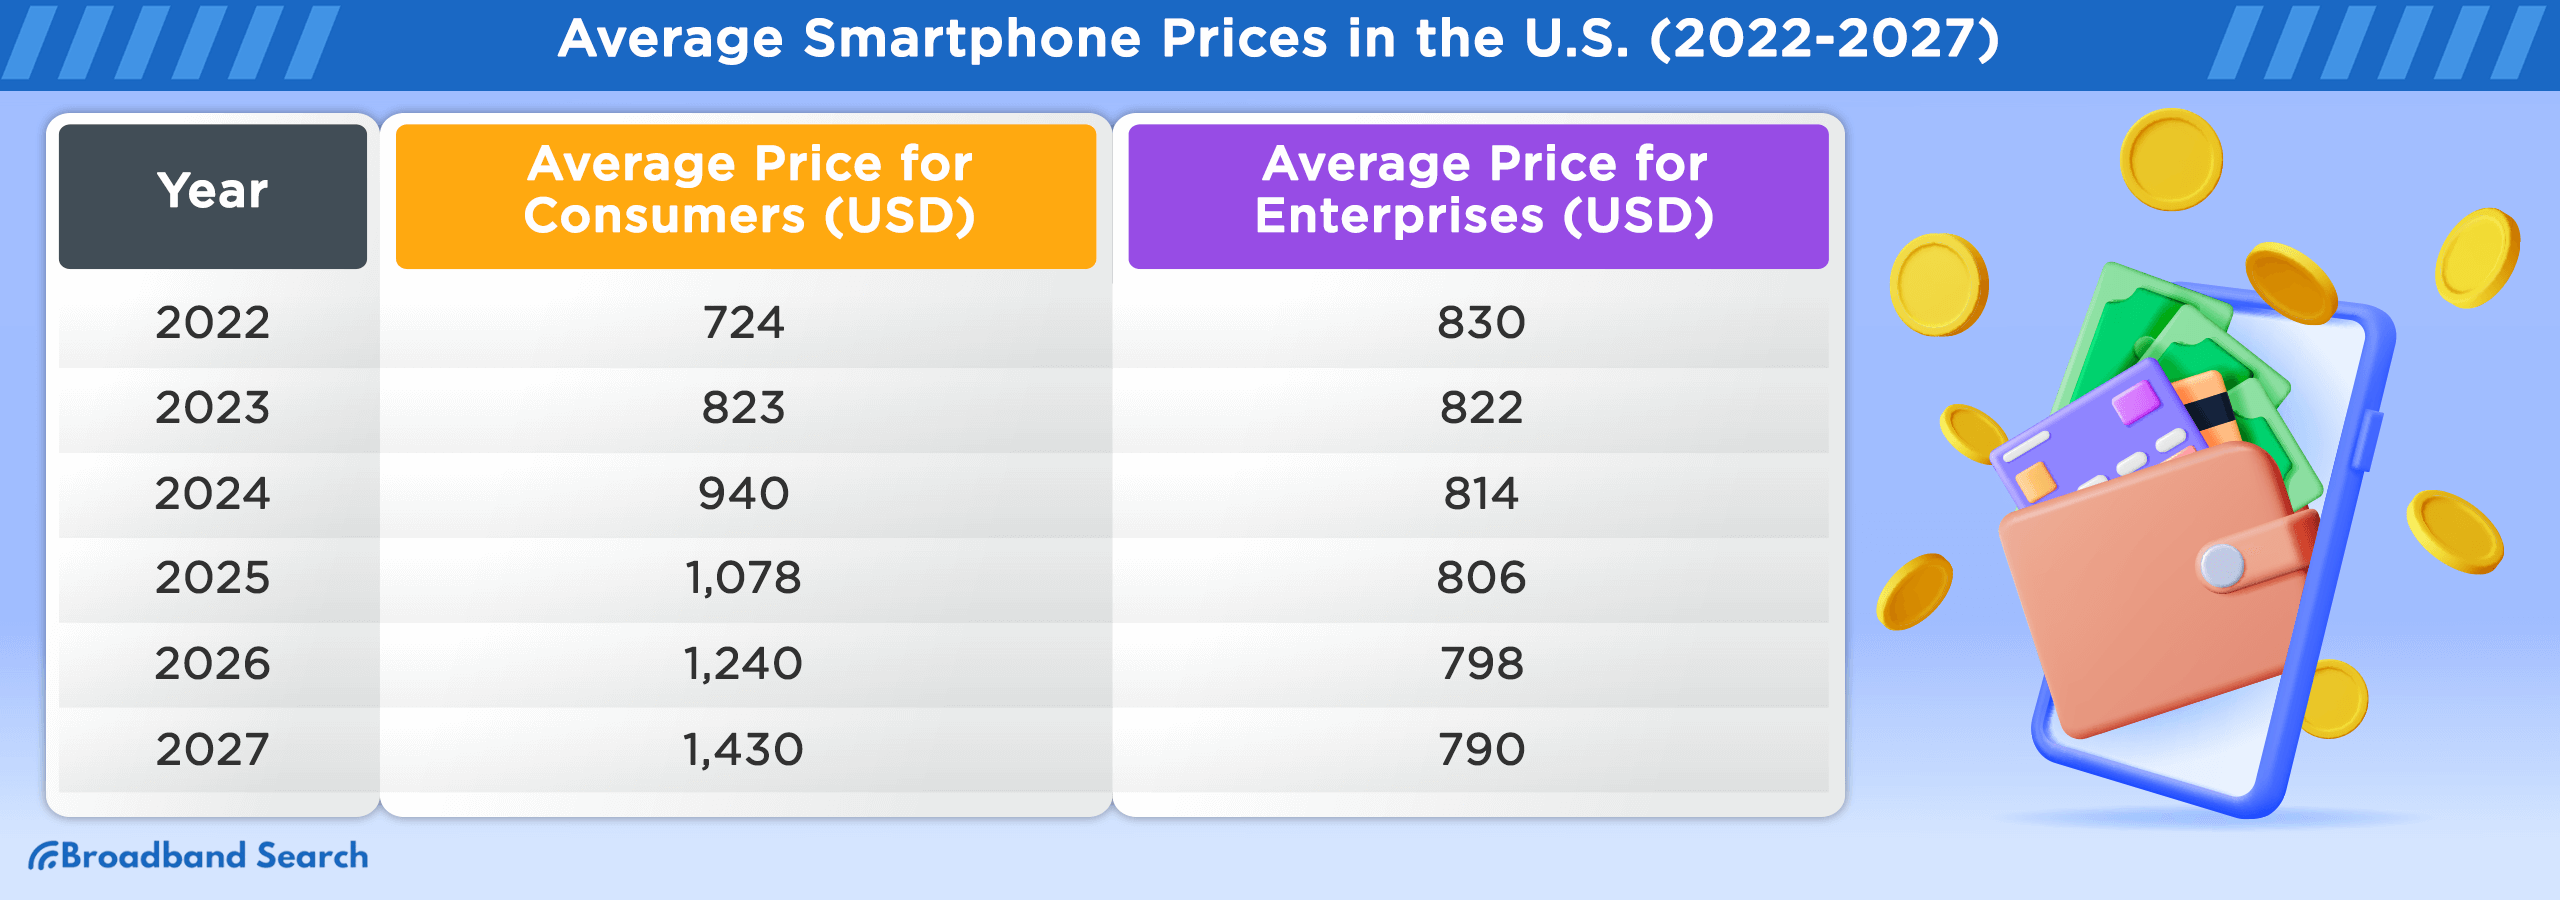 Average smartphone prices in the United states from 2022 to 2027